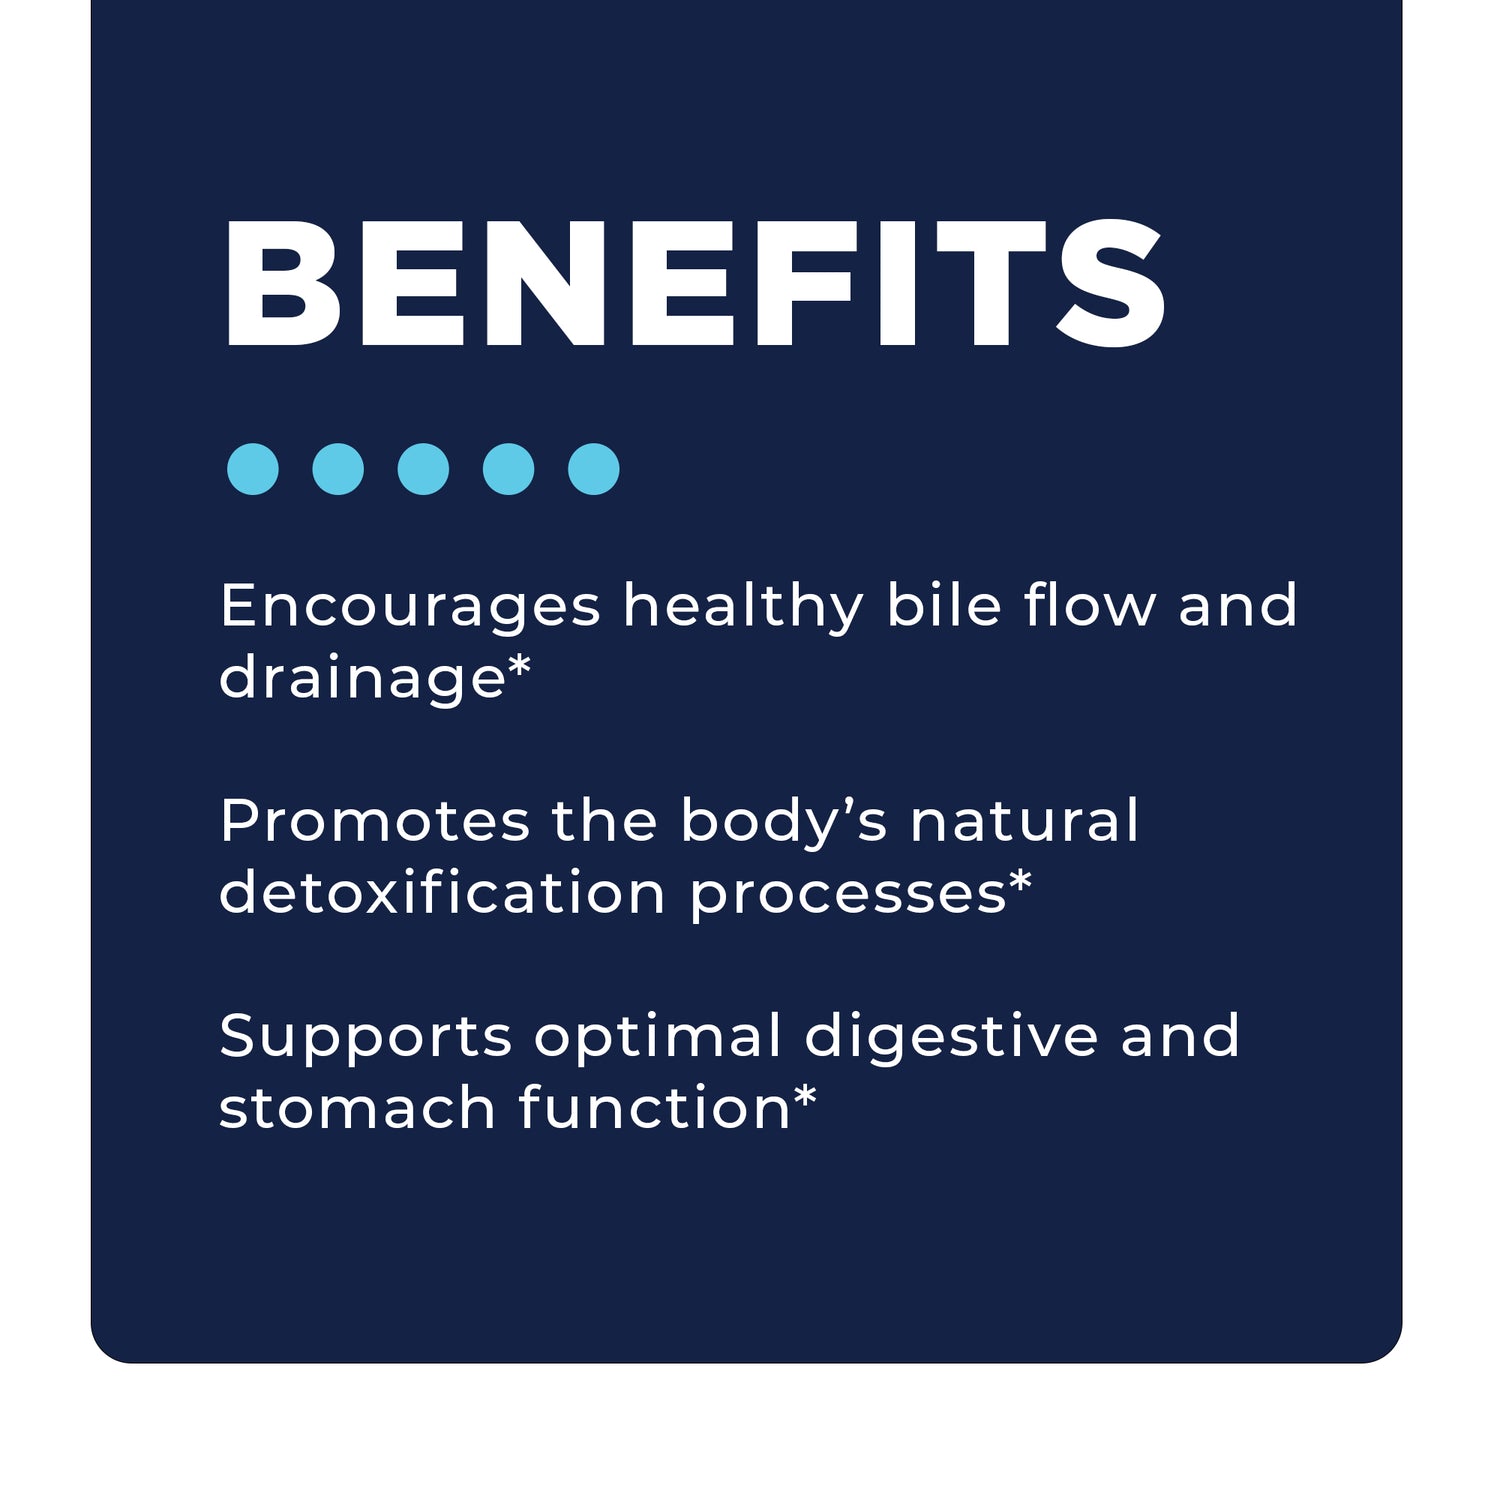 Stomach Support Protocol Benefits